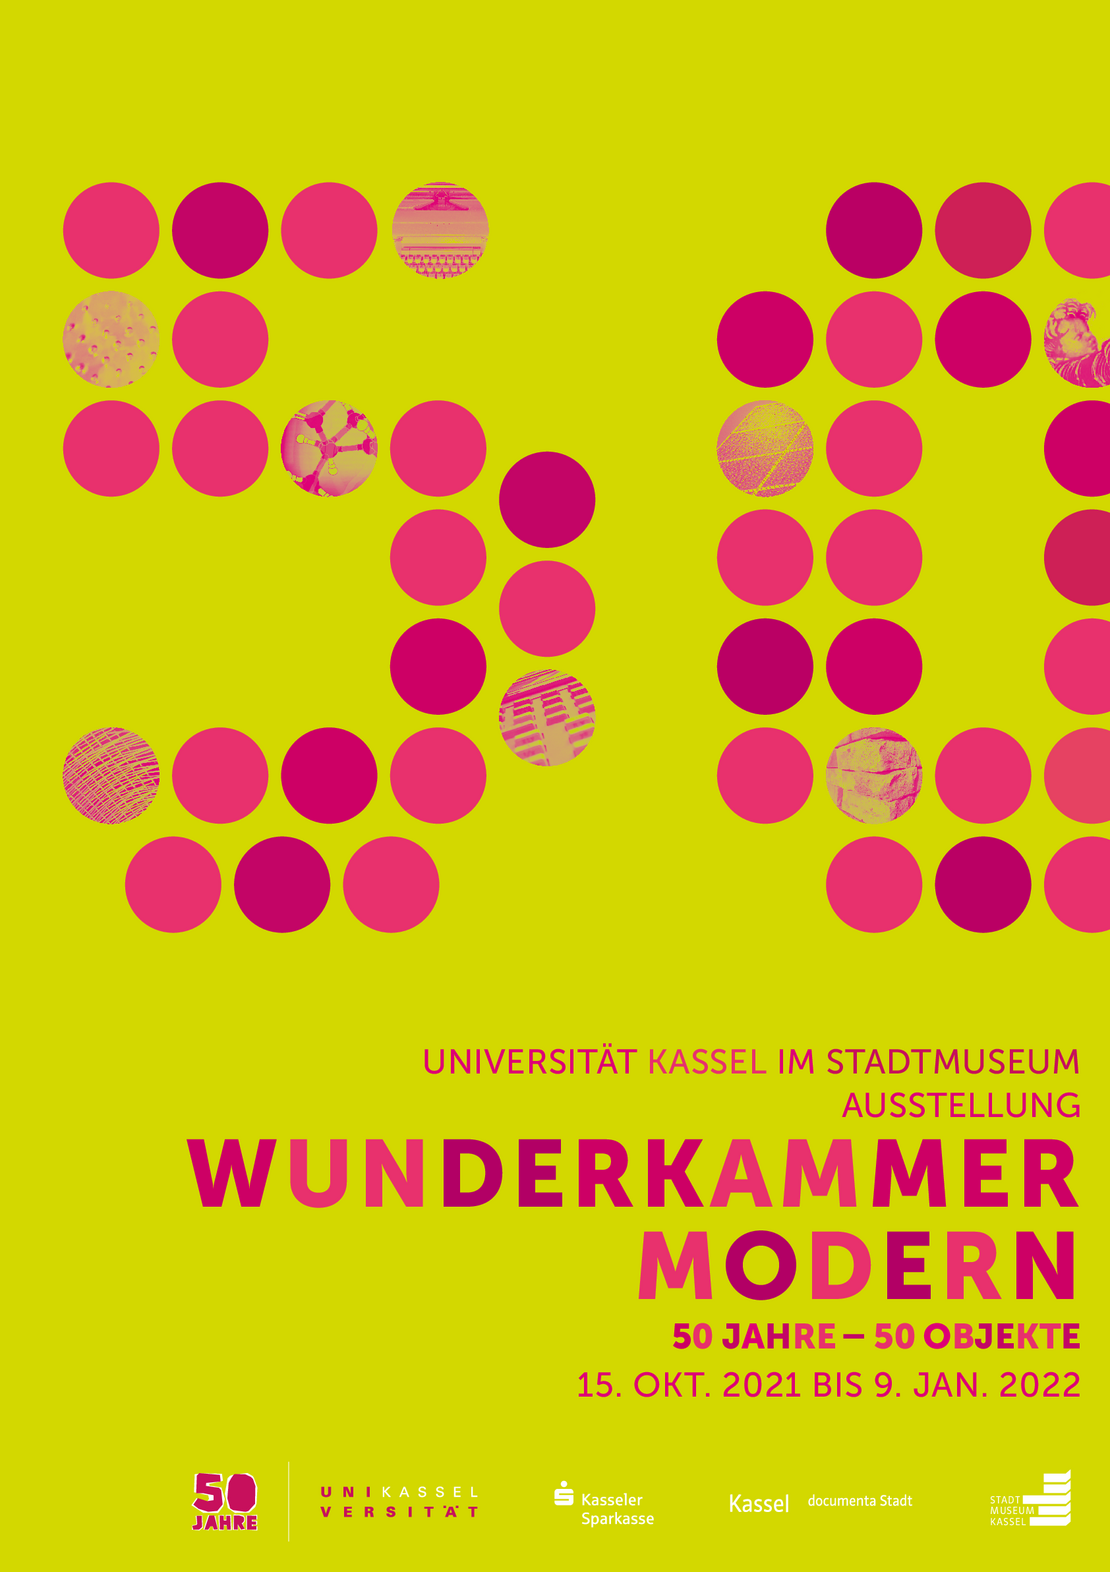 Poster for the exhibition: University of Kassel in the City Museum Exhibition WUNDERKAMMER MODERN 50 YEARS - 50 OBJECTS 15 OCT. 2021 to JAN. 9. 2022